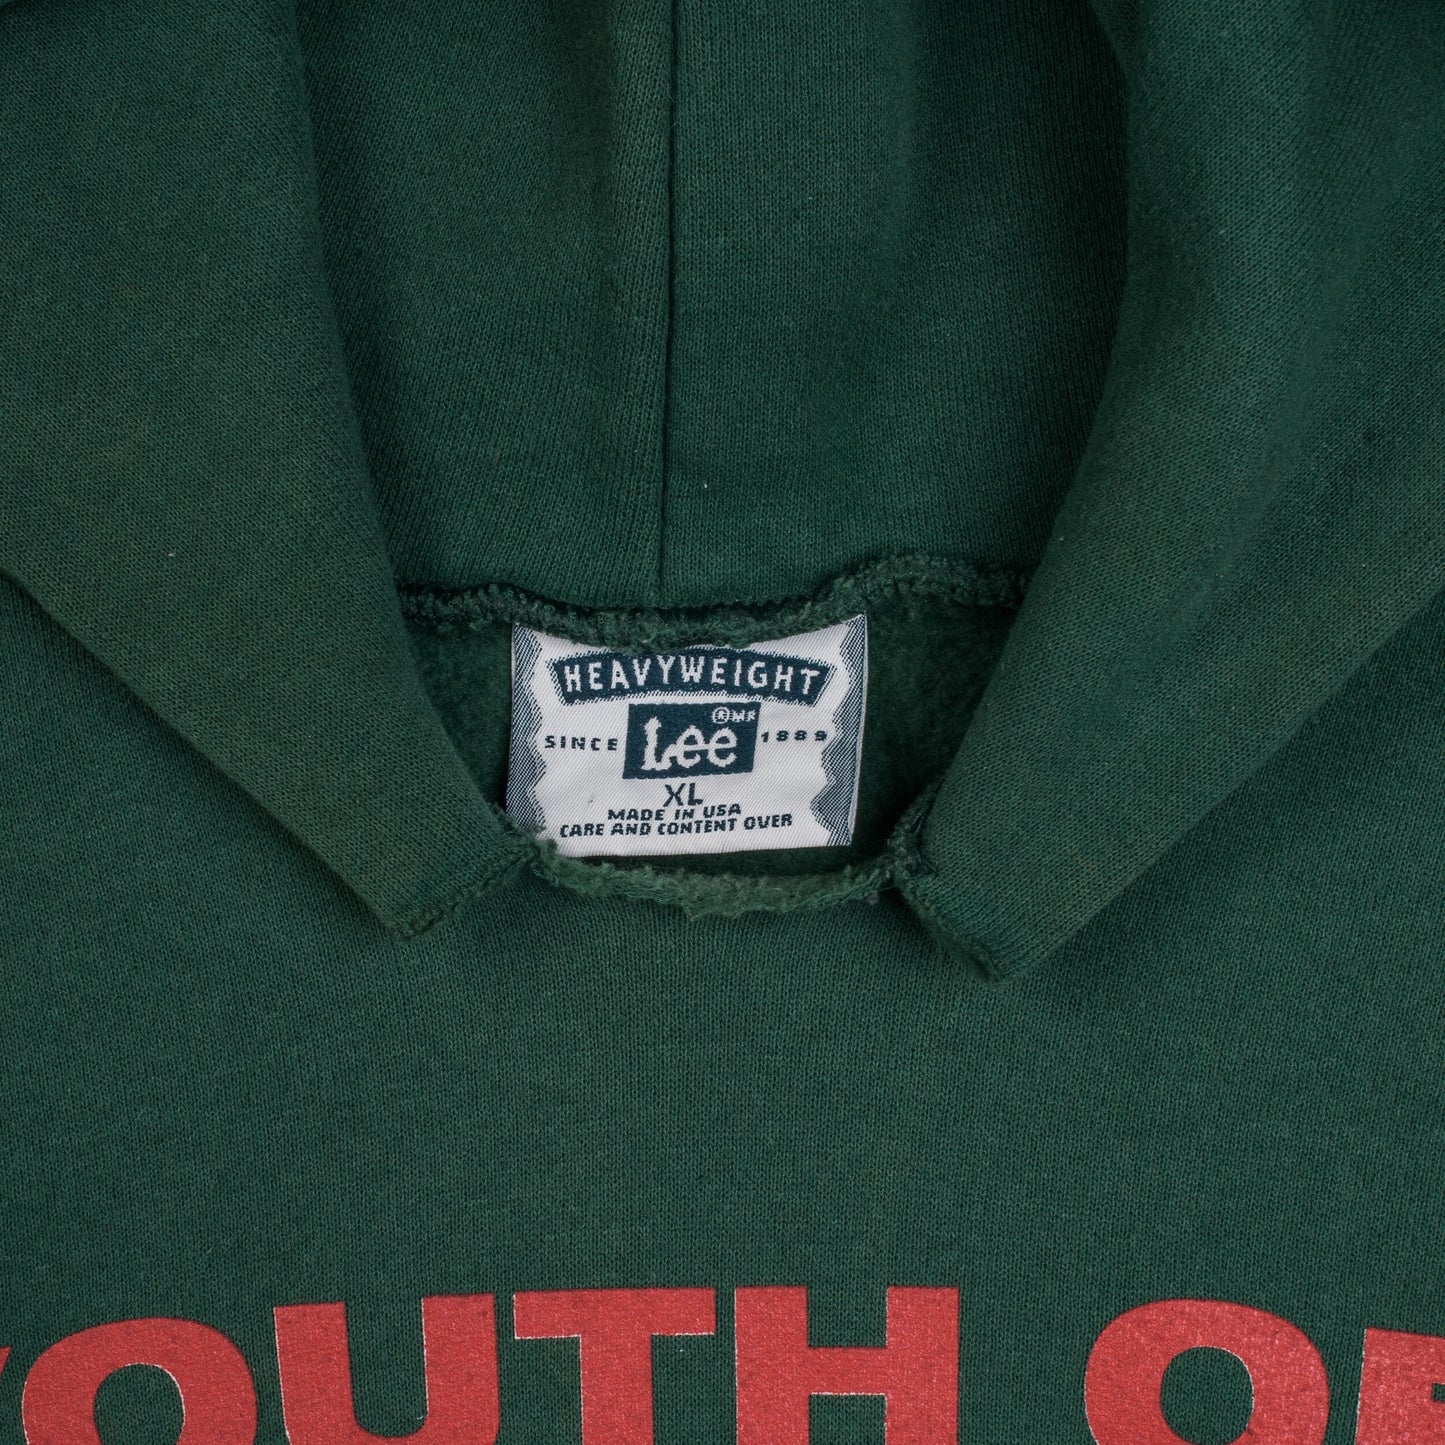 Vintage 90’s Youth Of Today Positive Outlook Hoodie